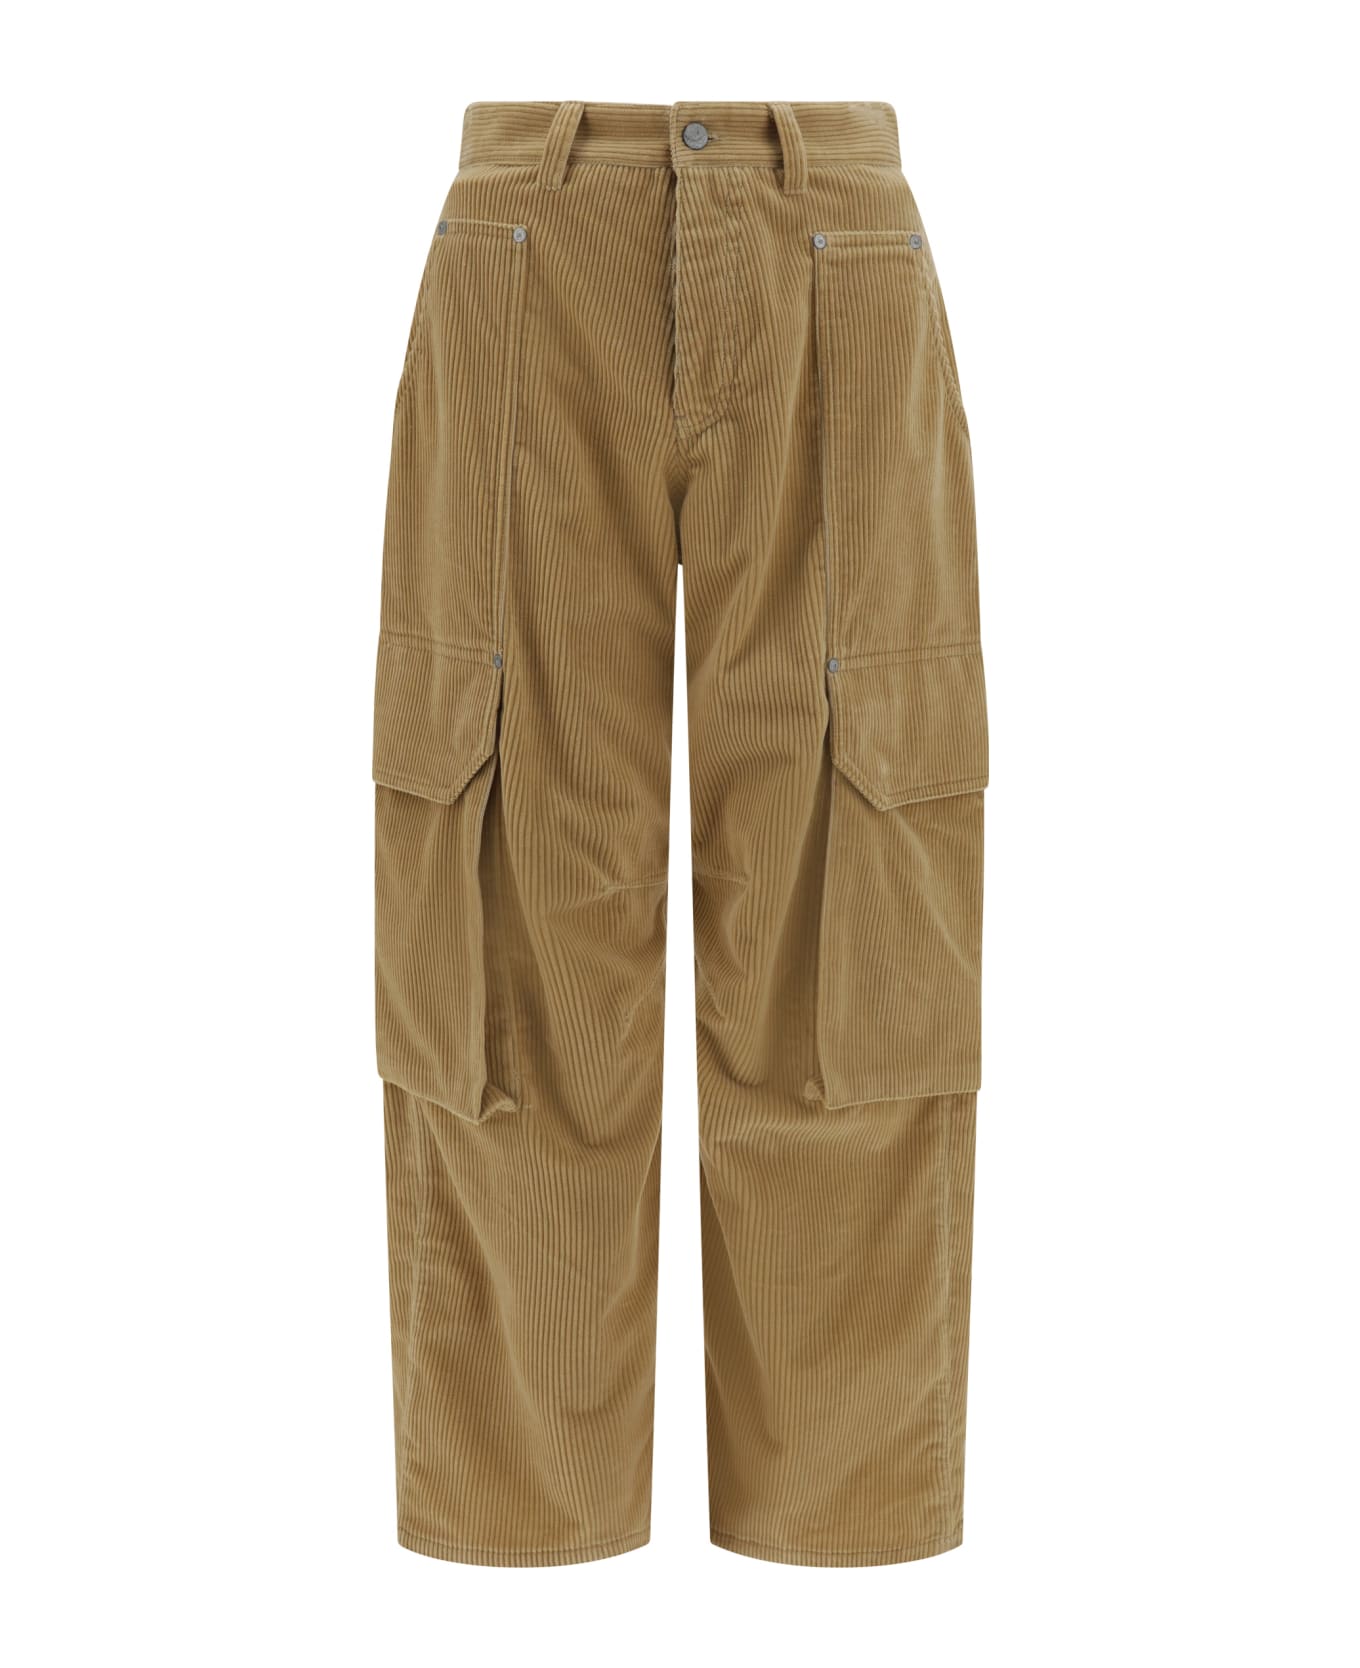 Palm Angels Carrot Cargo Trouser - Beige Bro ボトムス